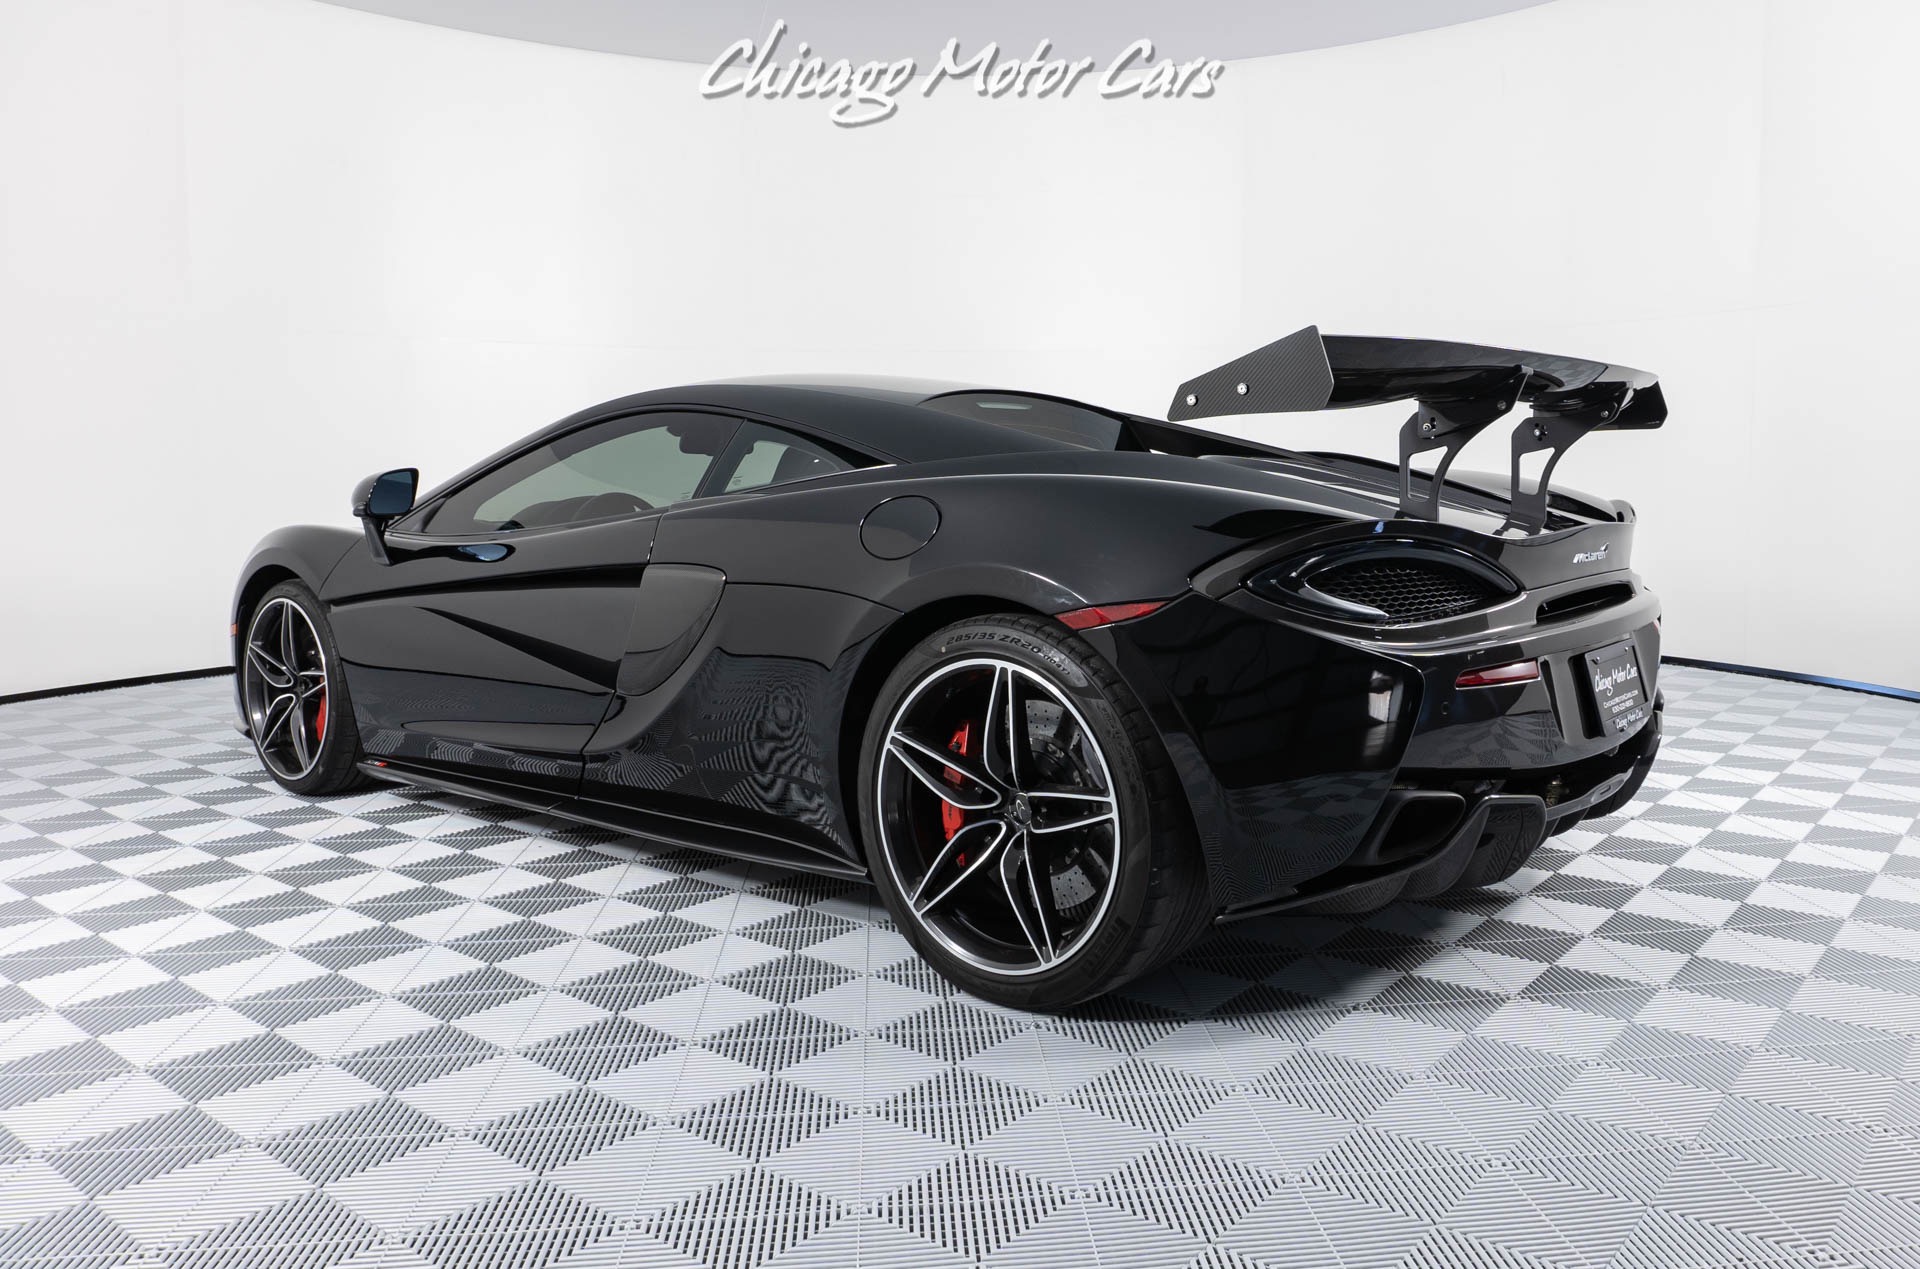 Used-2017-McLaren-570S-Coupe-Onyx-Black-Highly-Equipped-Tons-of-Carbon-Fiber